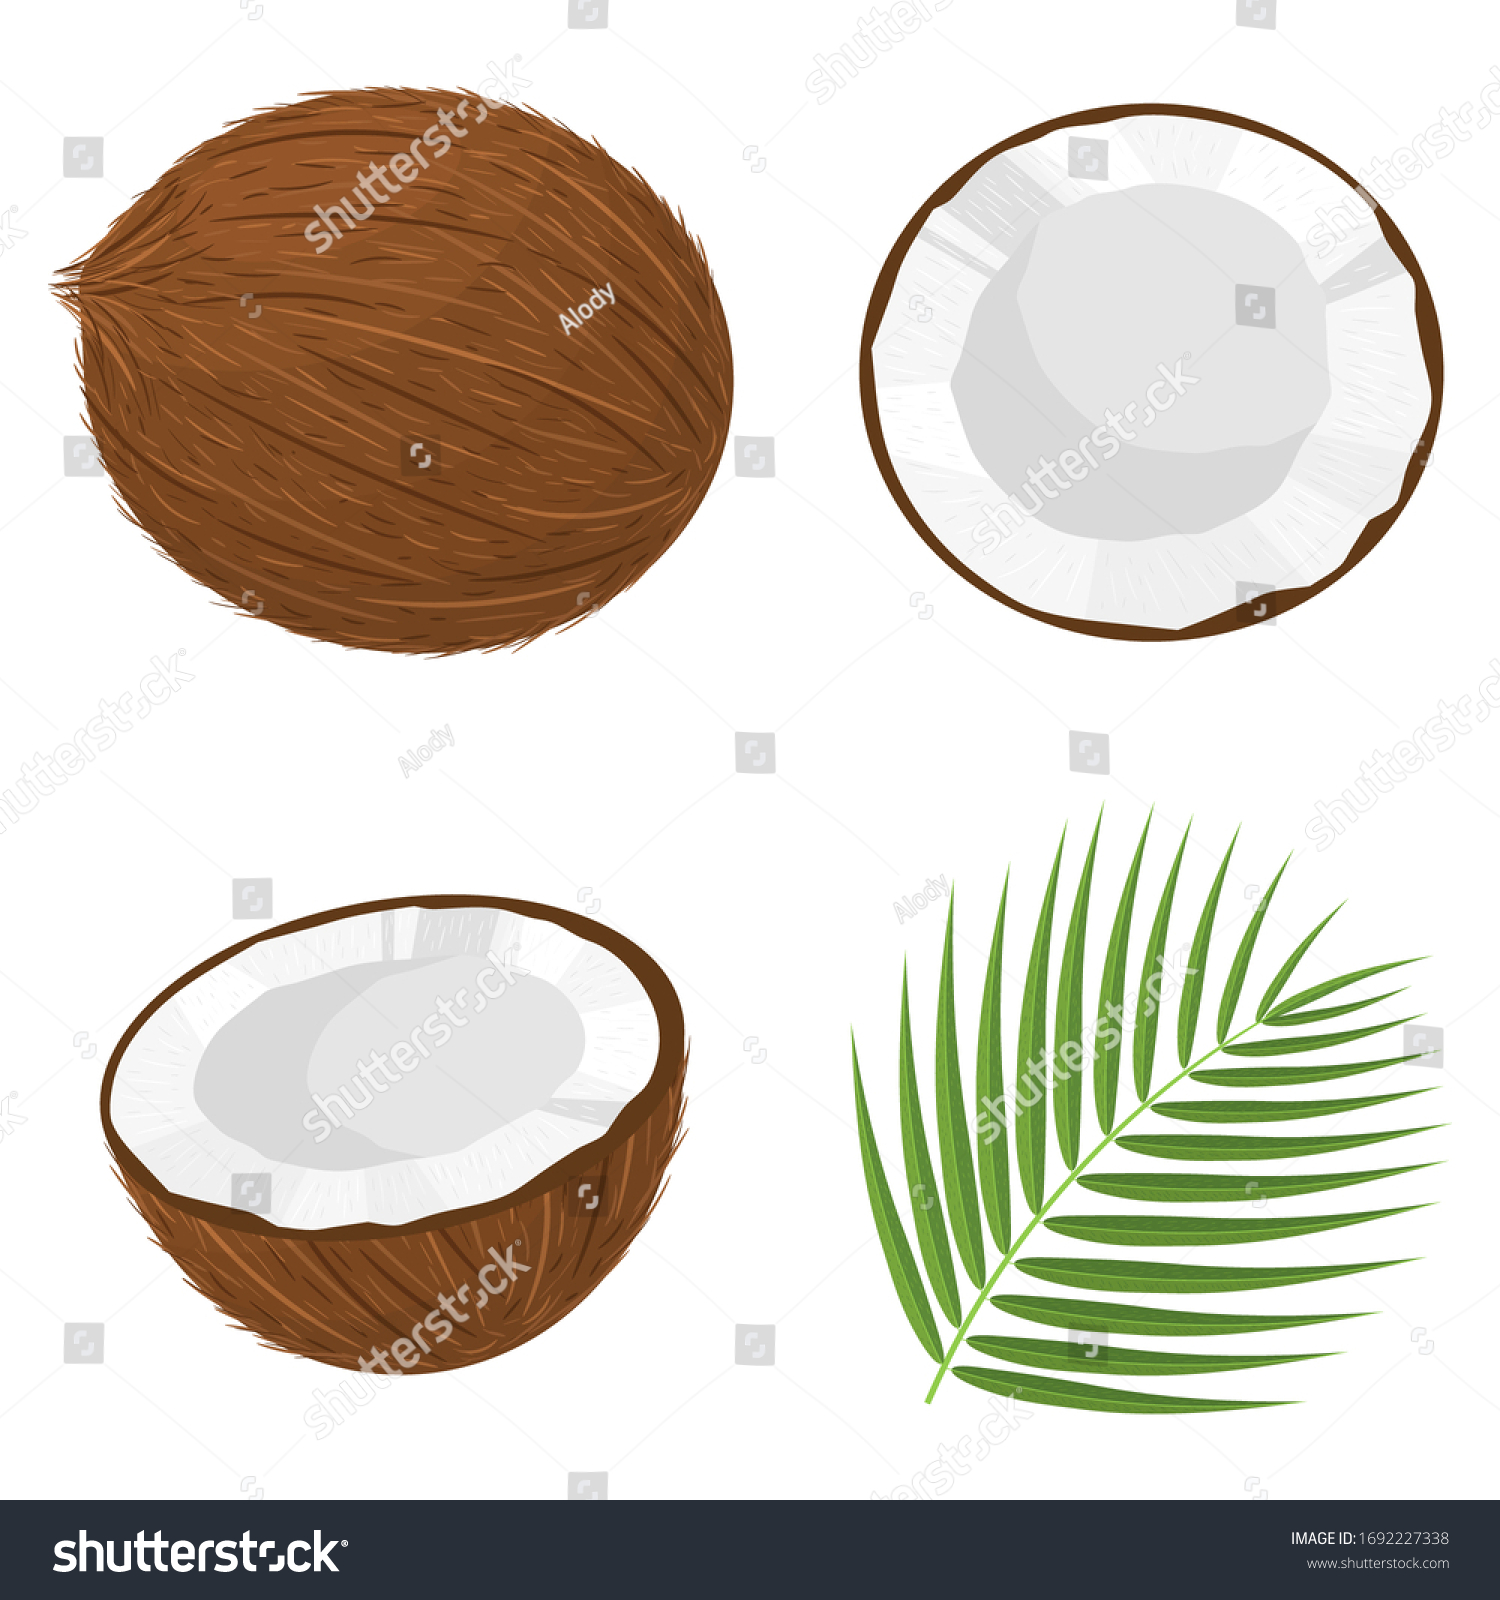 SVG of Set of exotic whole, half, cut slice coconut fruits and leaves isolated on white background. Summer fruits for healthy lifestyle. Organic fruit. Cartoon style. Vector illustration for any design. svg